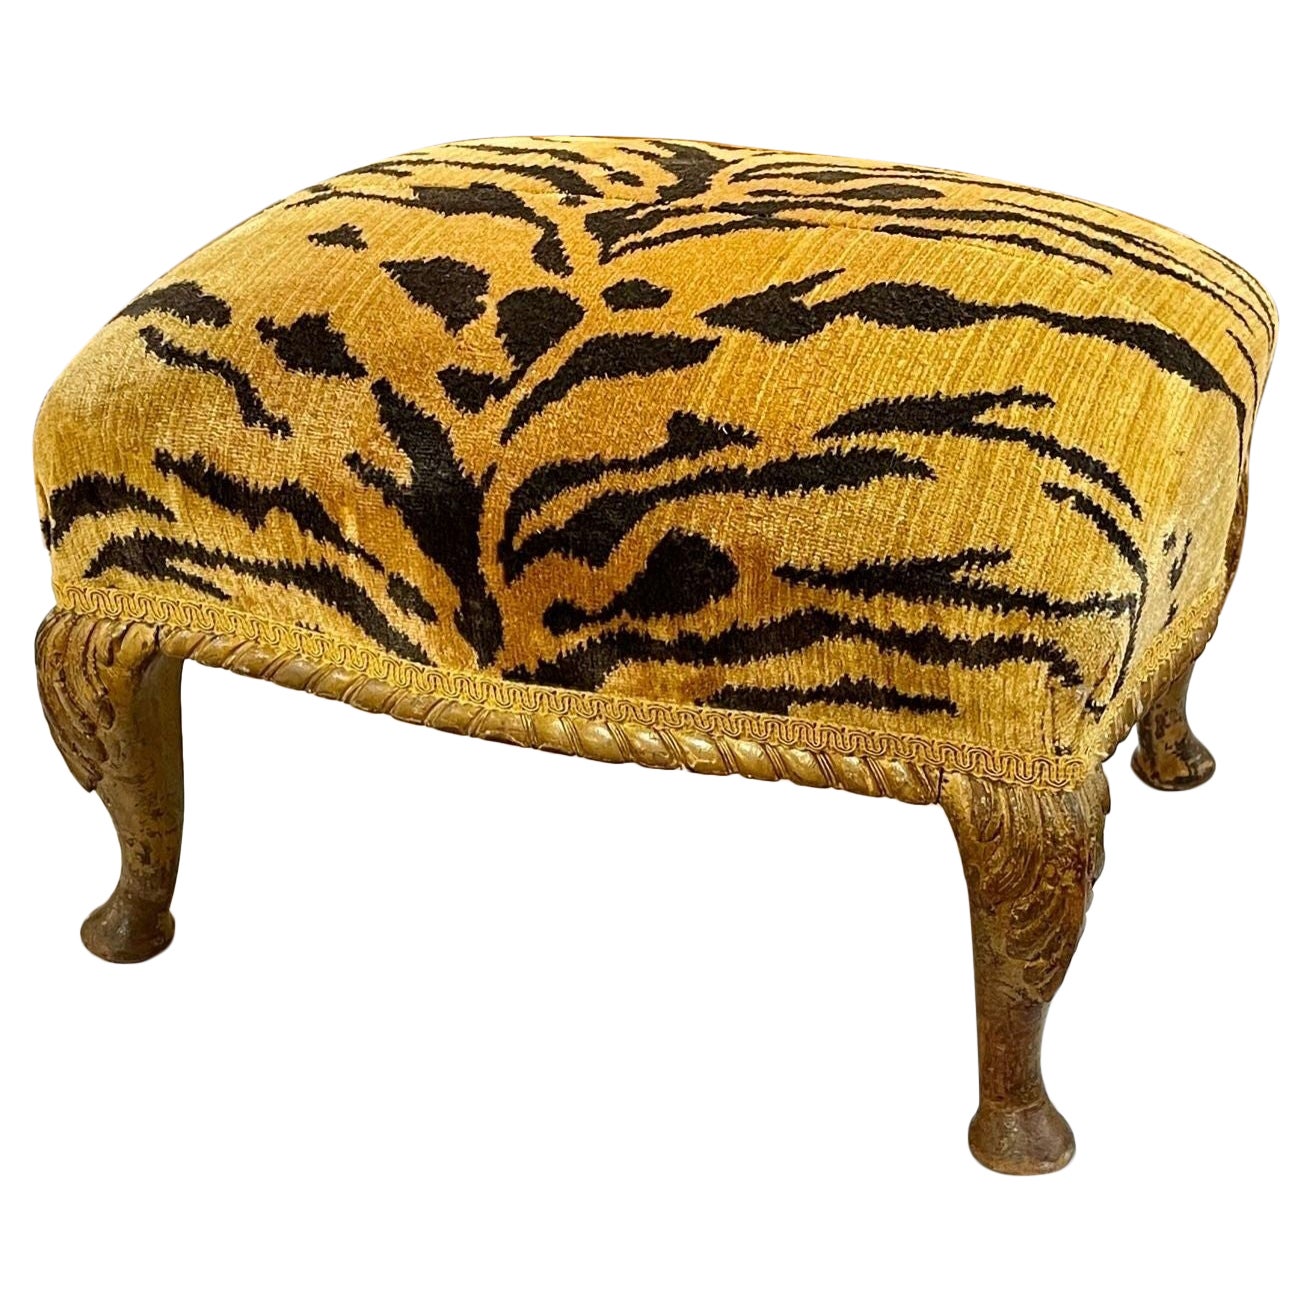 19th Century Carved and Gilt Wood Stool with Scalamandre Tiger Upholstery